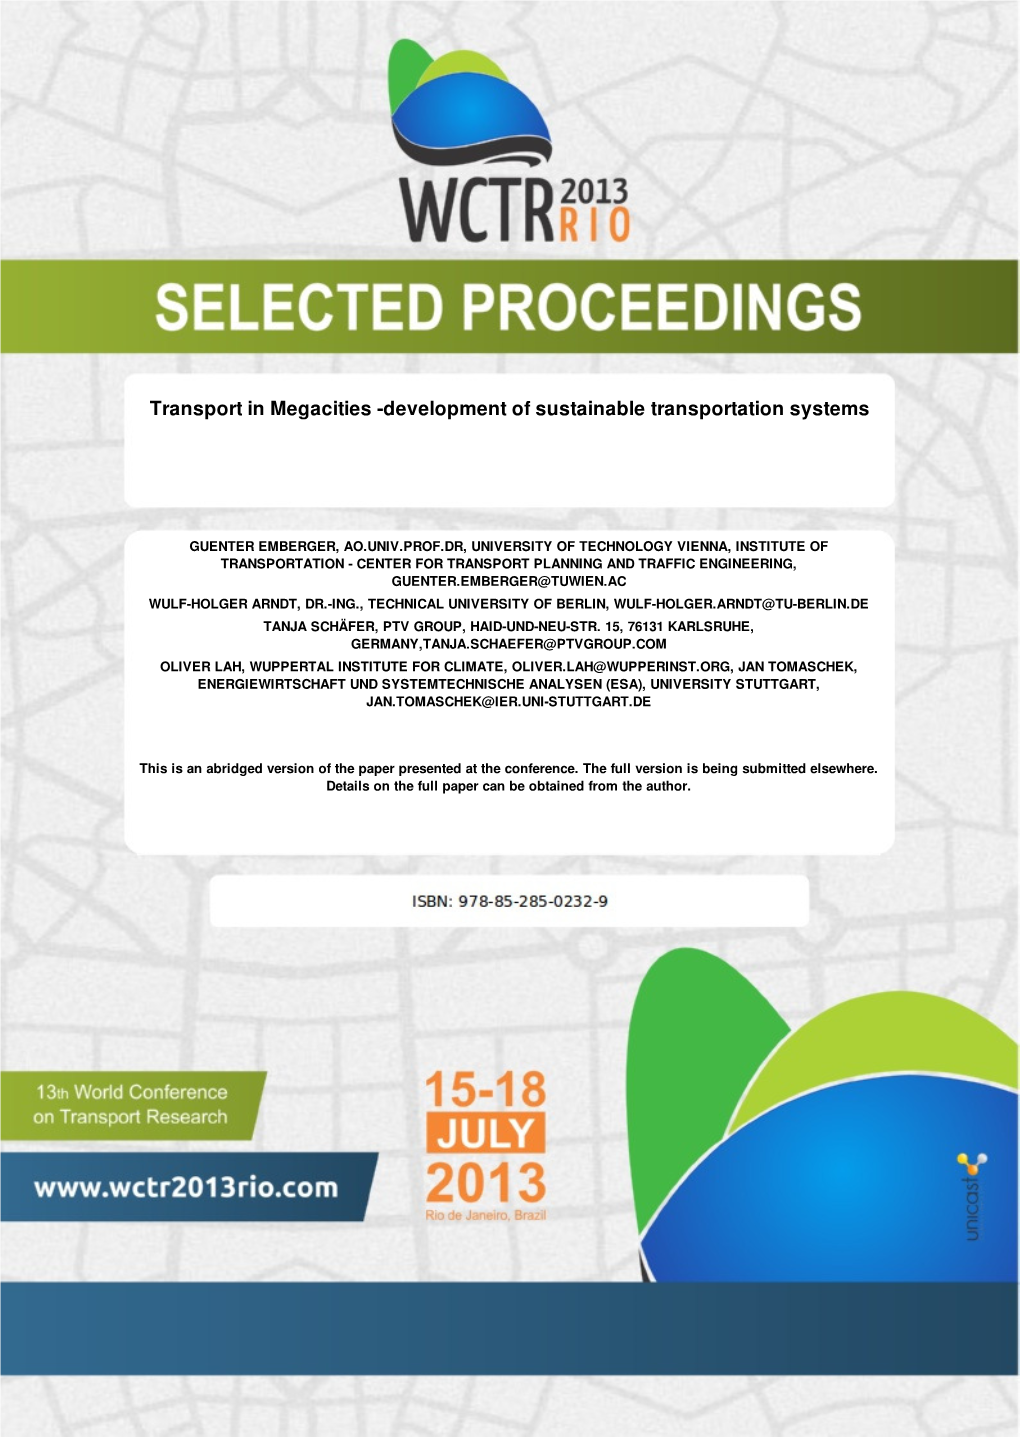 Transport in Megacities -Development of Sustainable Transportation Systems